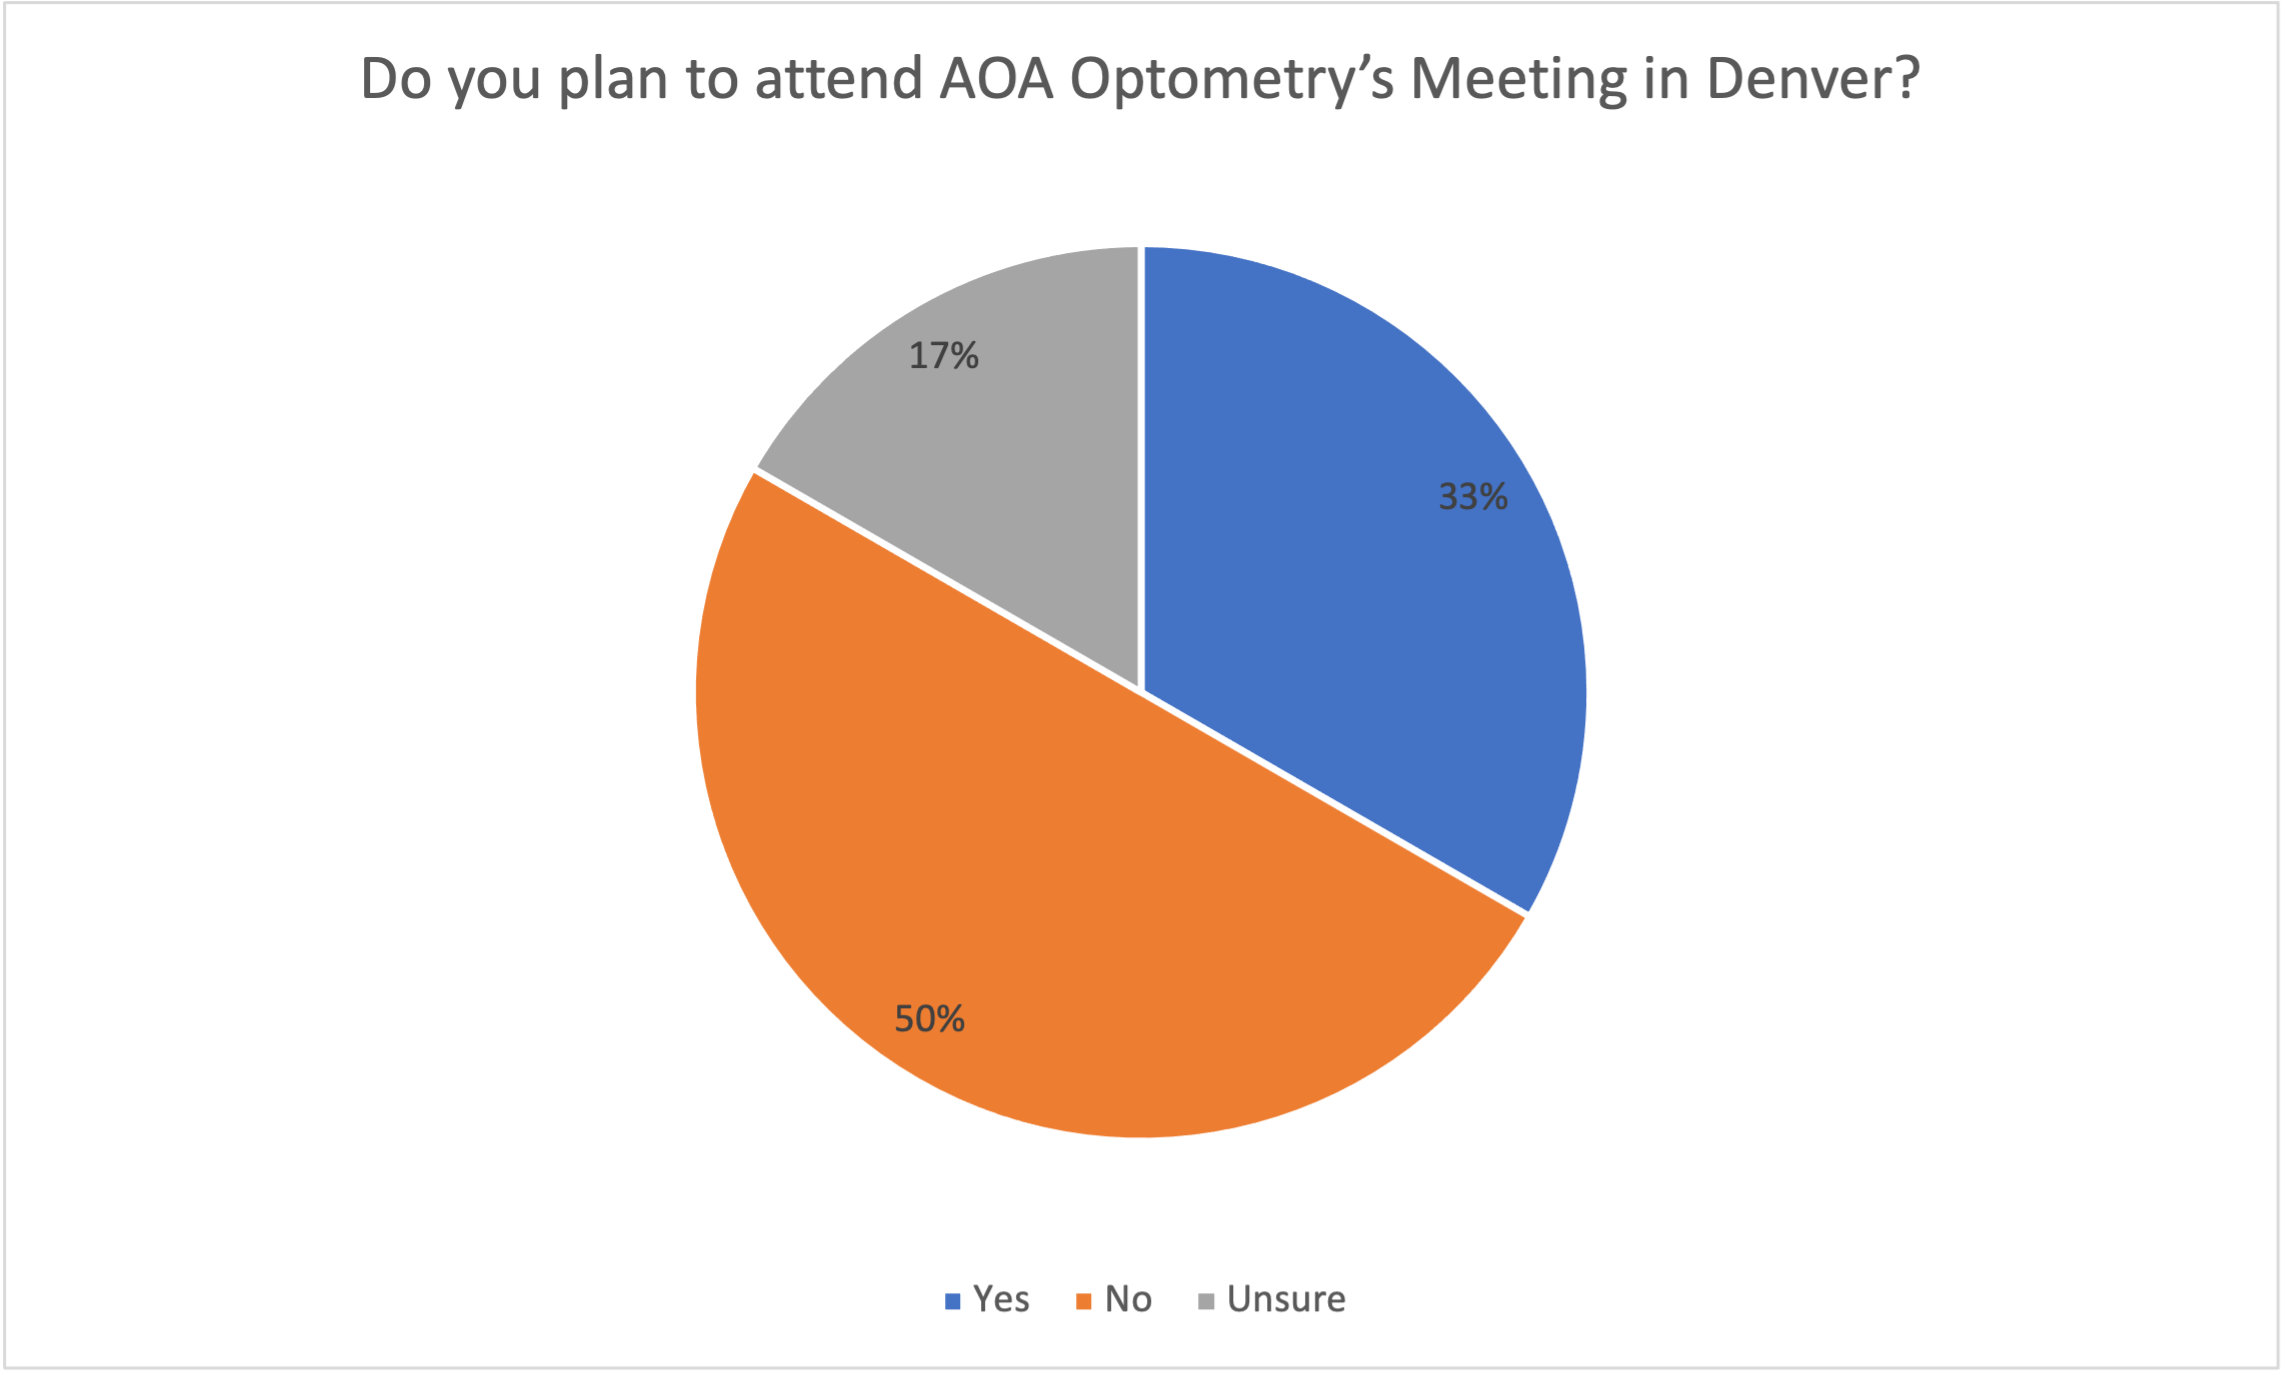 Poll results: Do you plan to attend AOA Optometry’s Meeting in Denver?